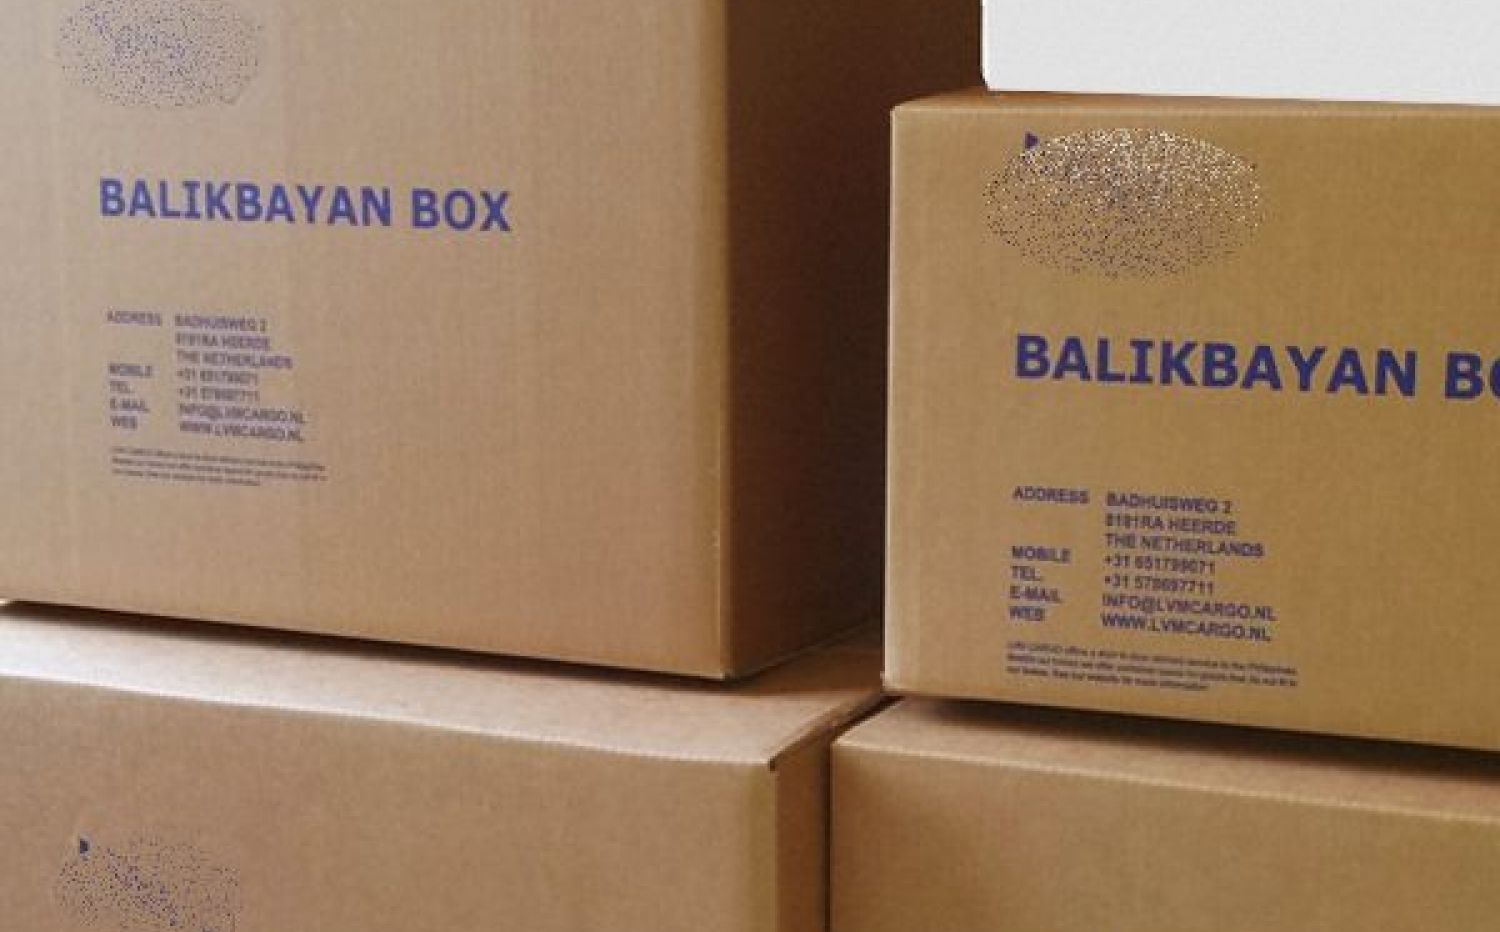 Sending balikbayan boxes to the Philippines.